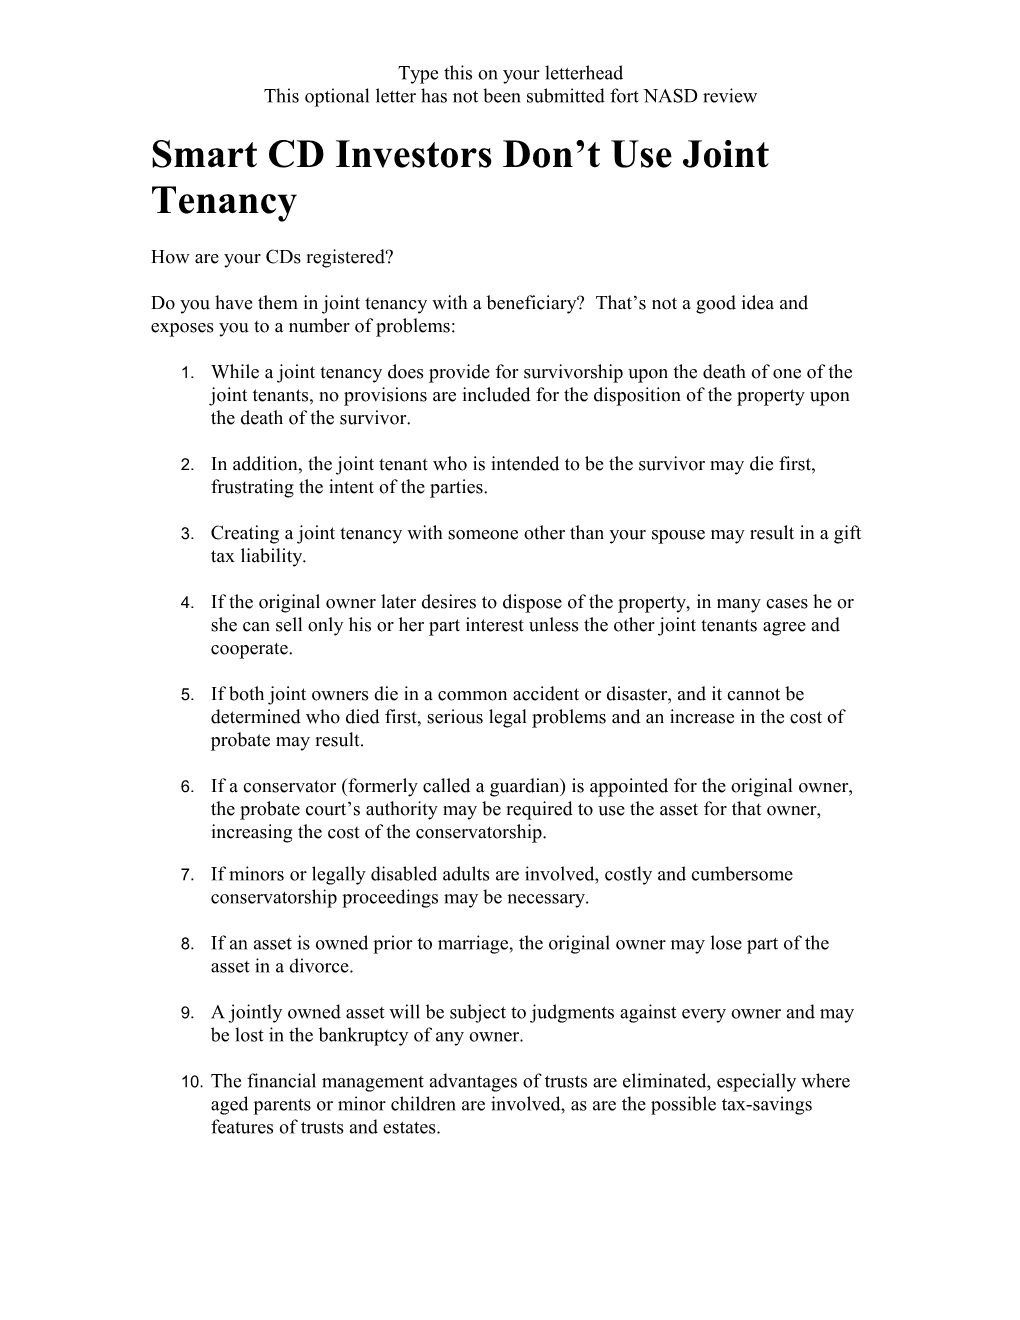 Smart CD Investors Don T Use Joint Tenancy